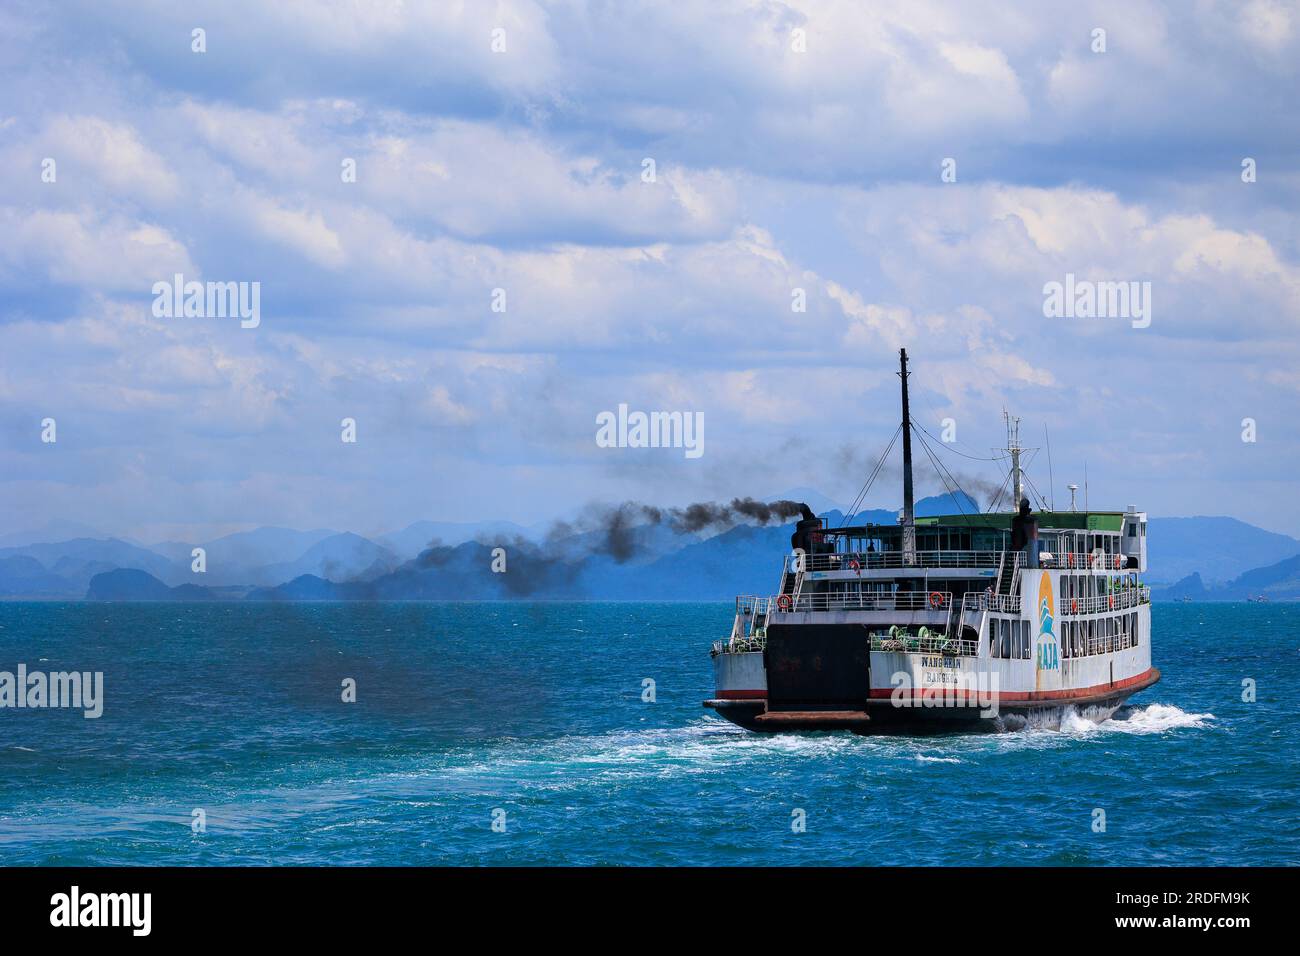 Ferry boat exhausting dark polluted smoke, Thailand Stock Photo